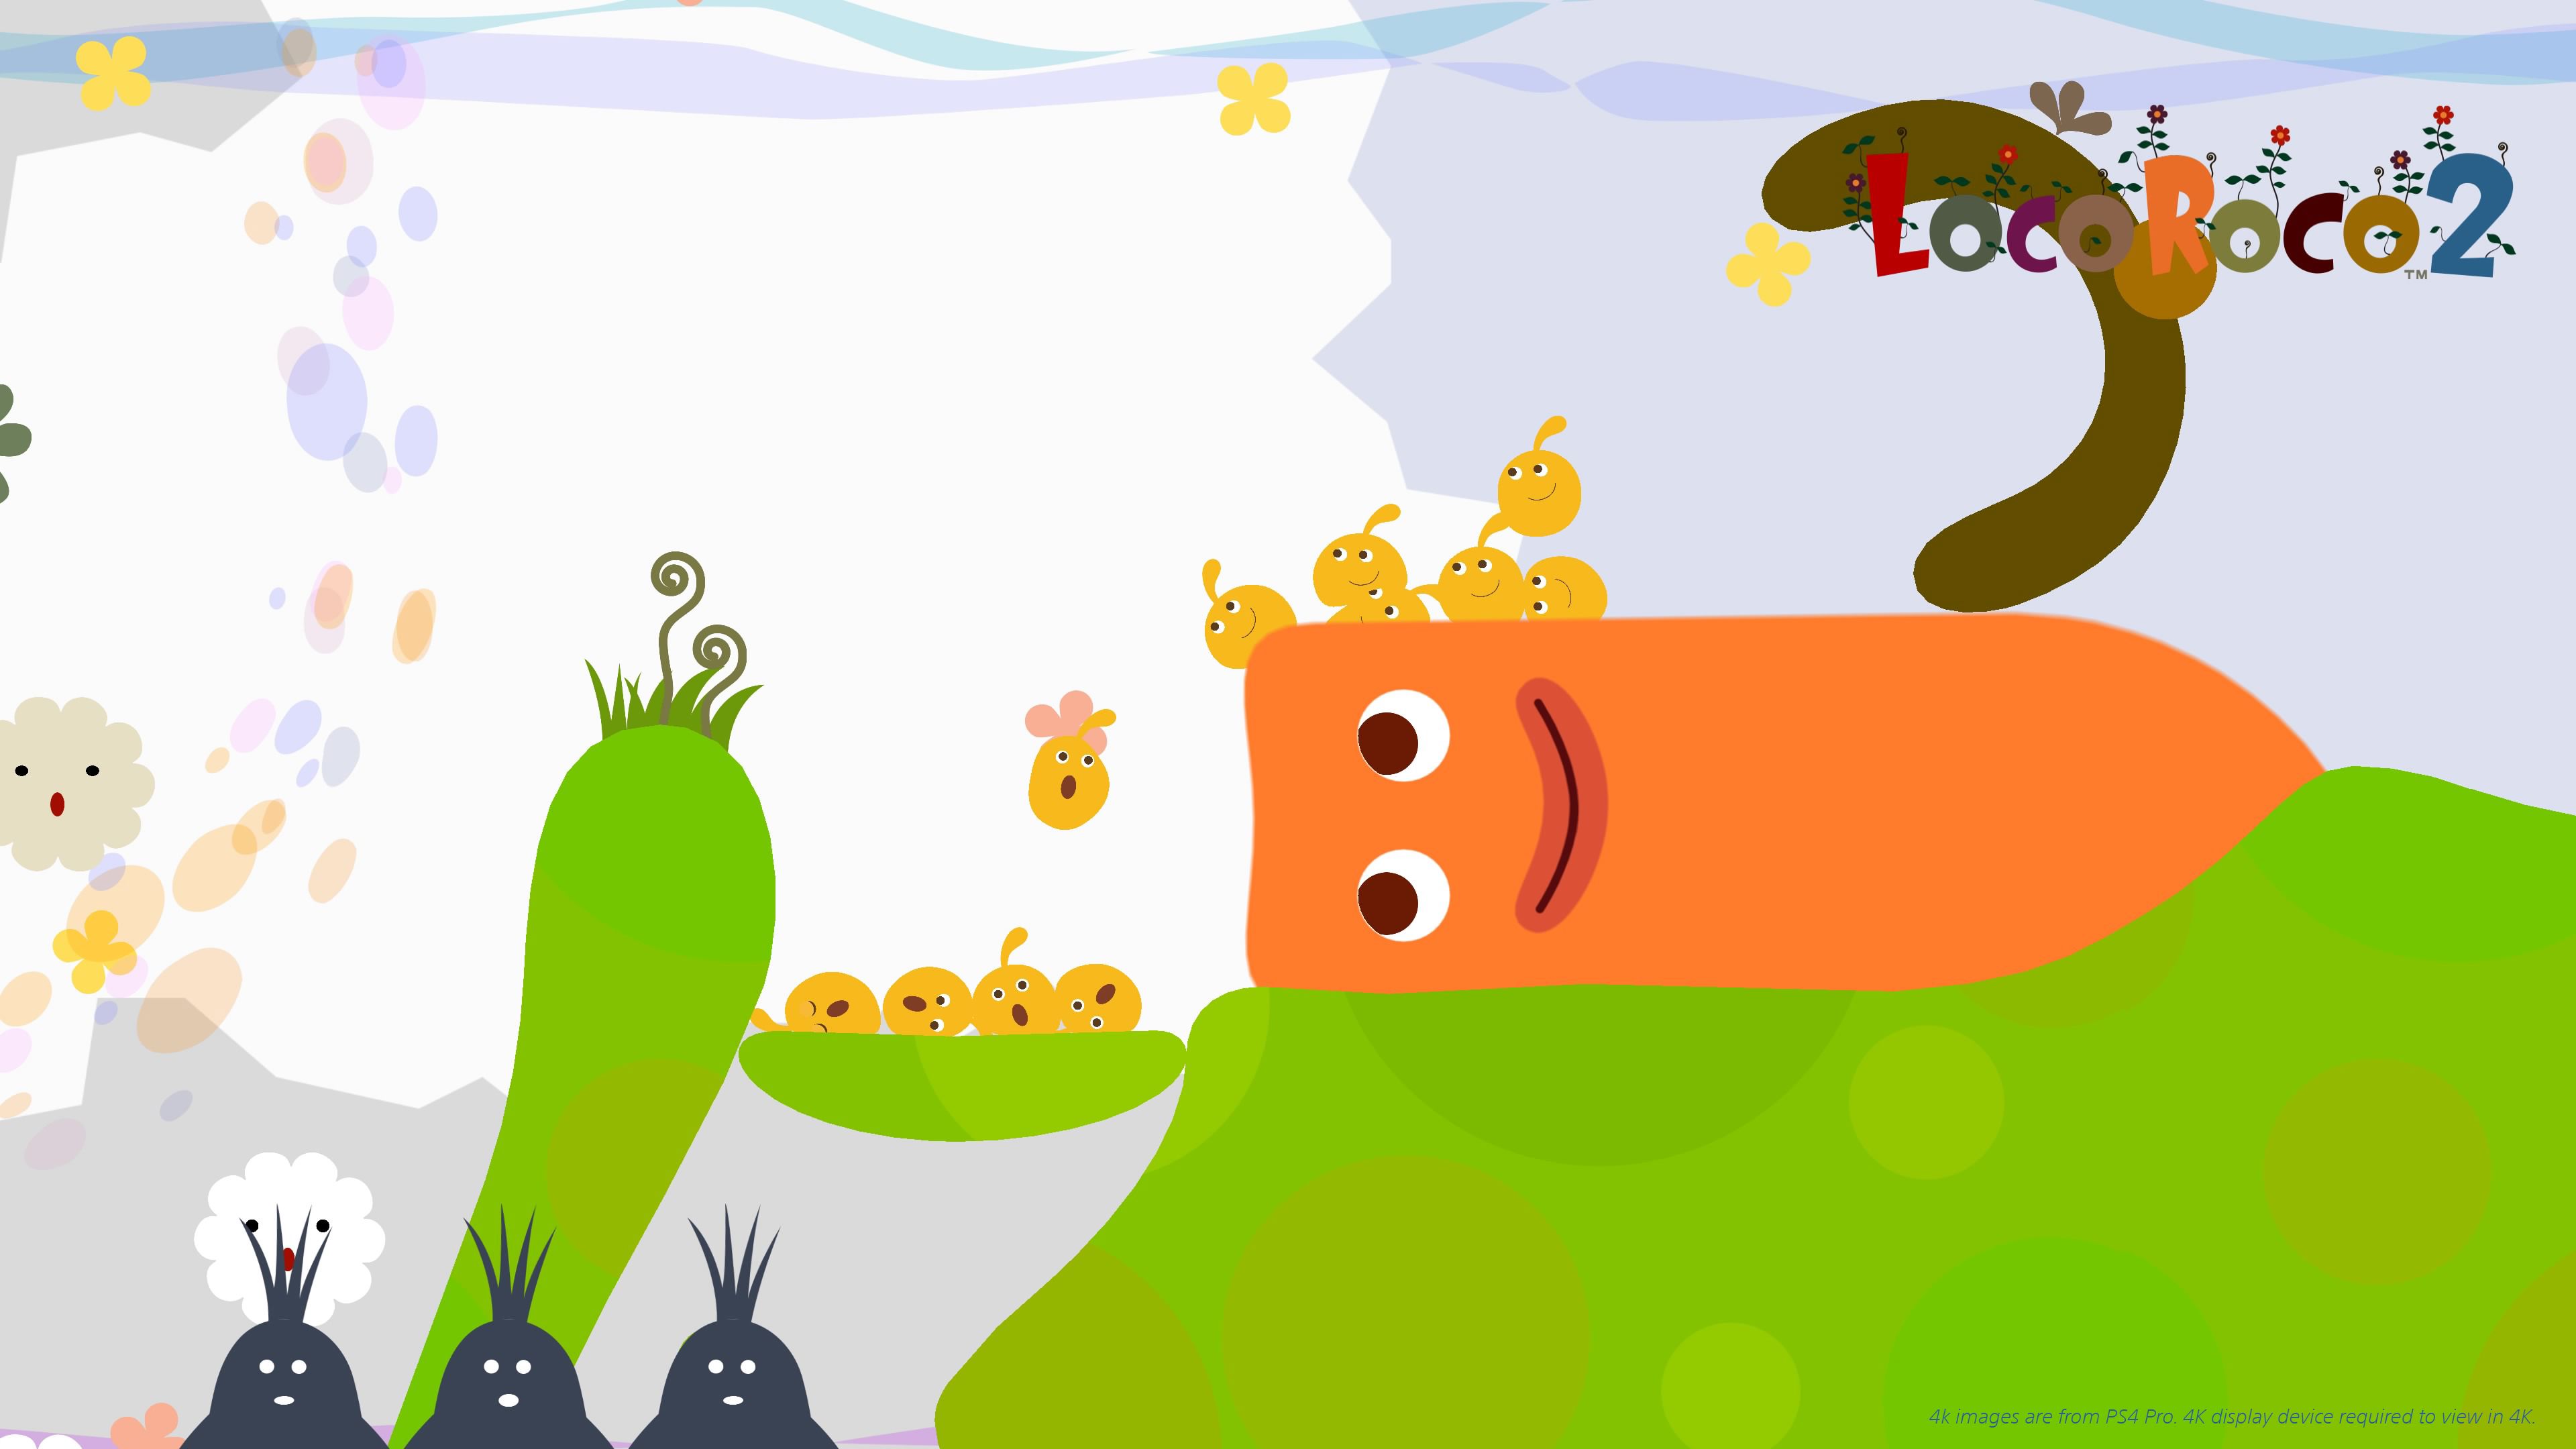 Image for LocoRoco 2 Remastered is coming in December